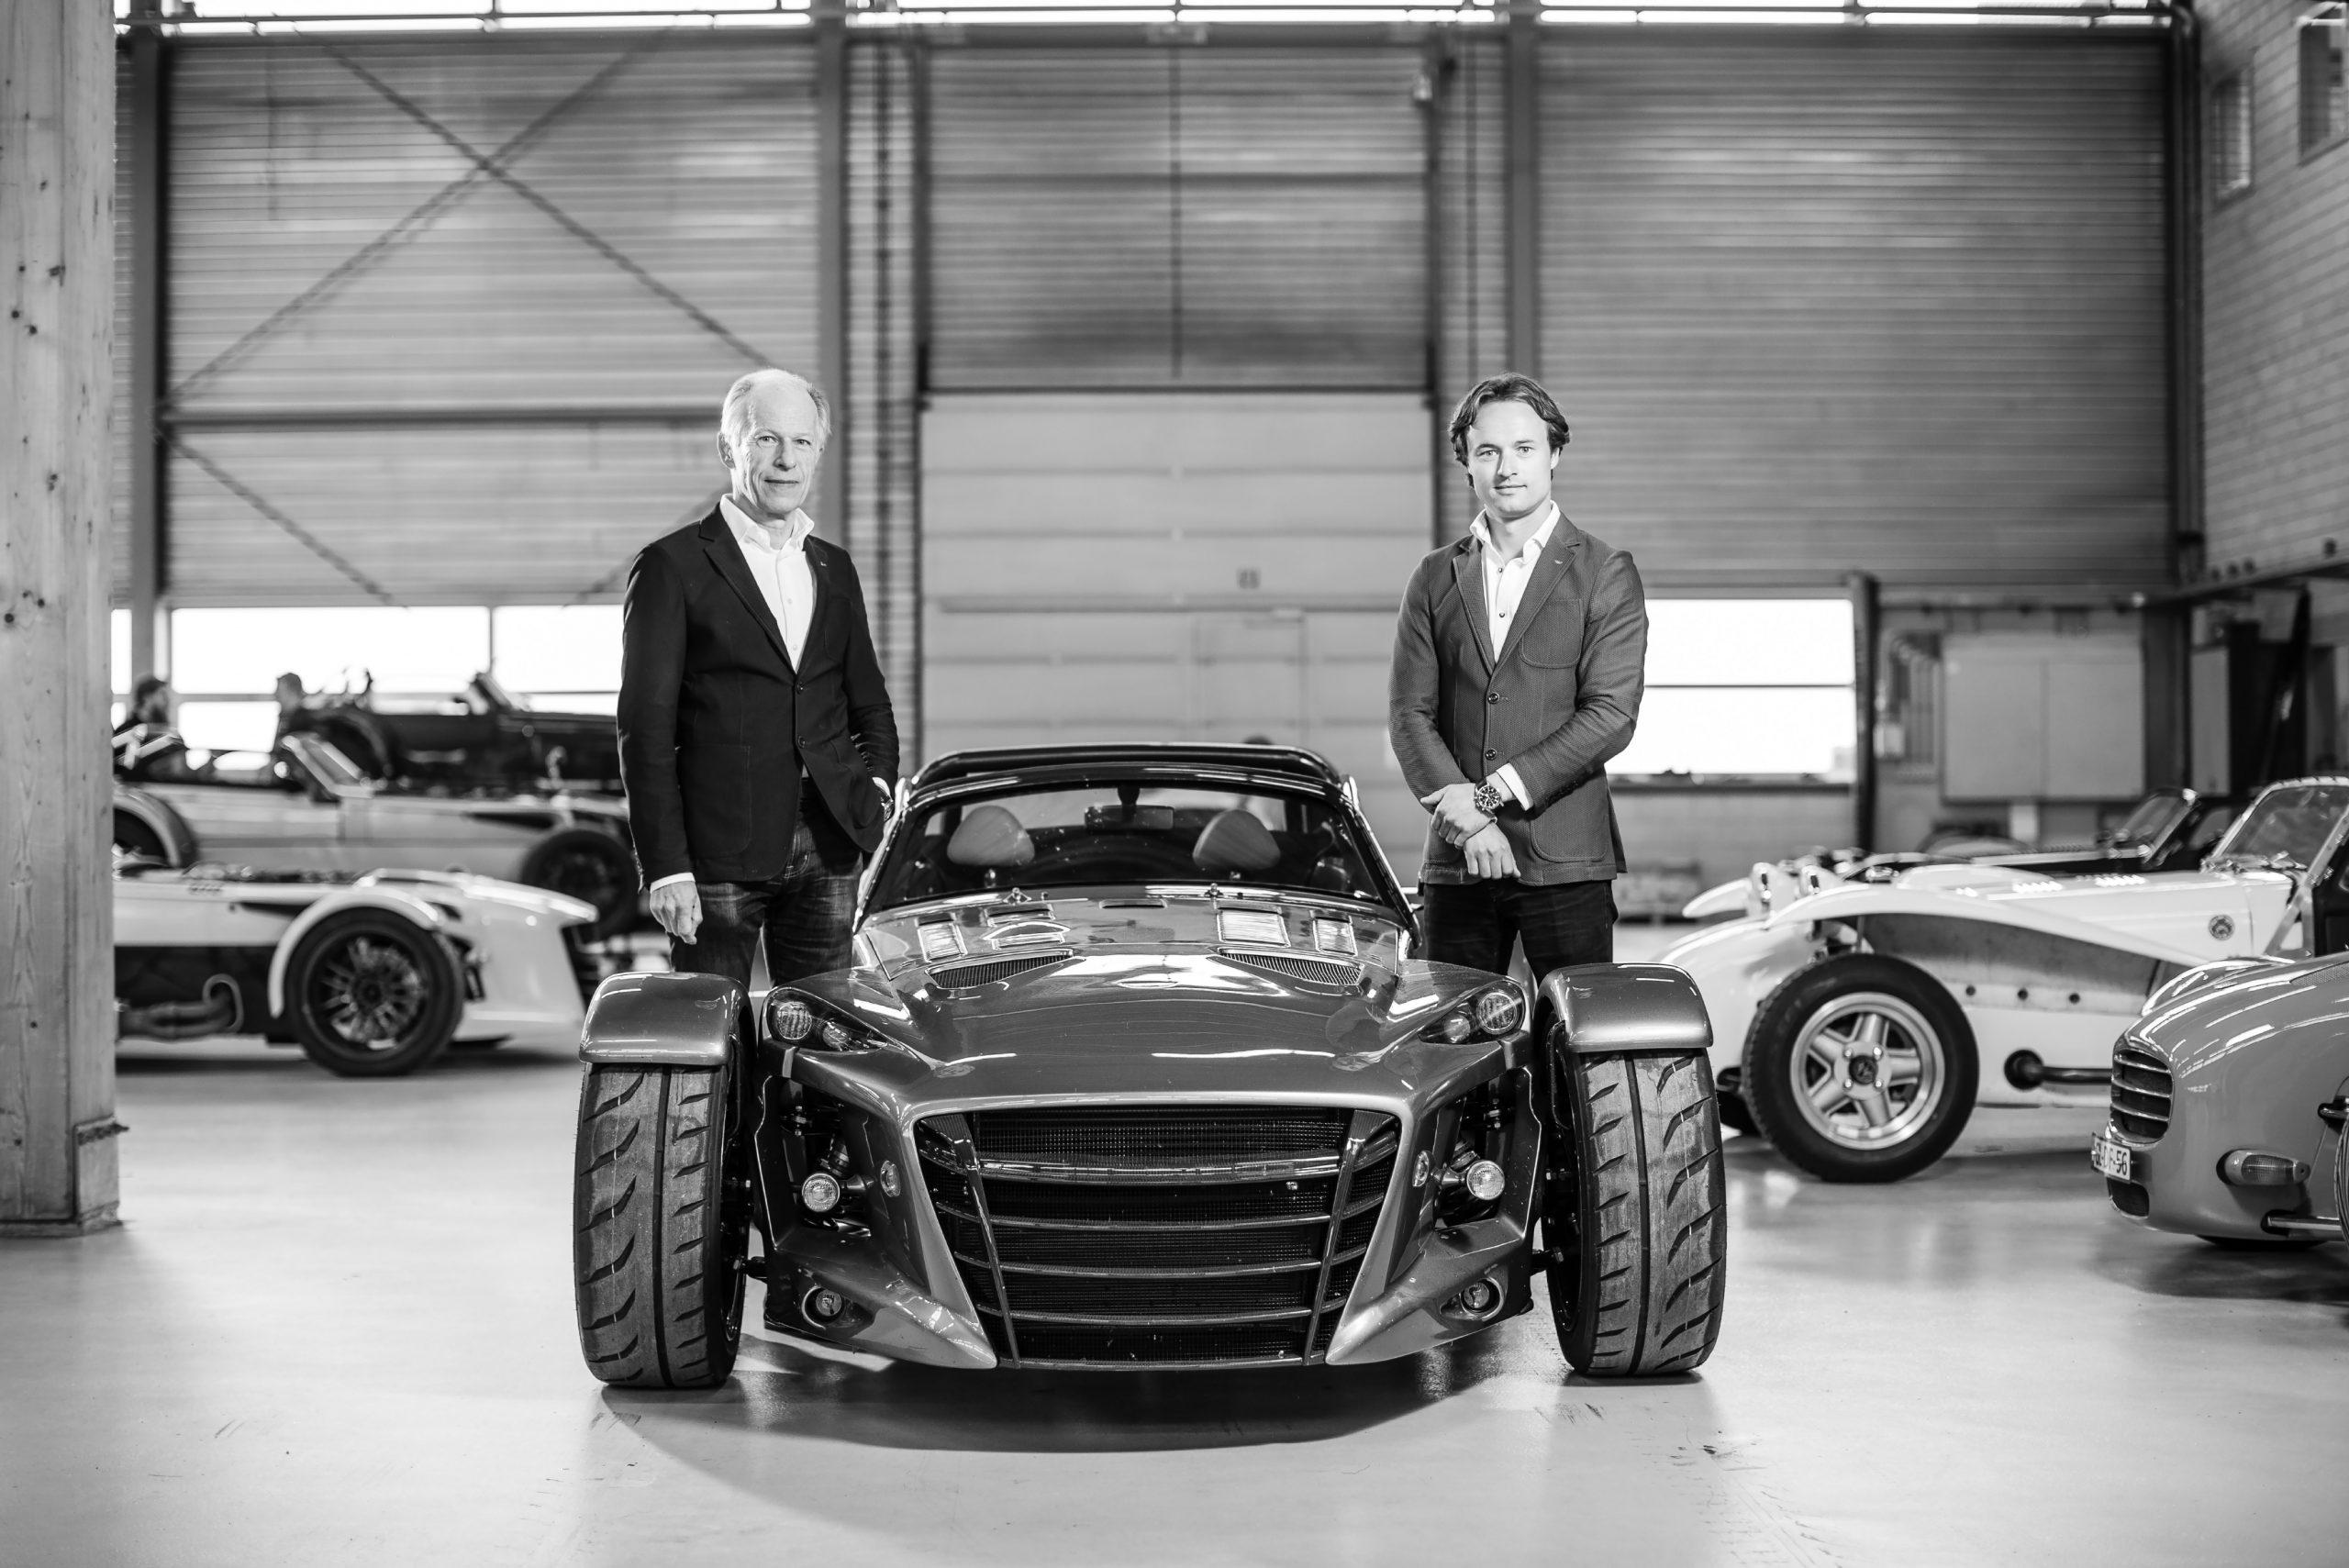 New Donkervoort sees a chance in the restriction on gas engines in 2035